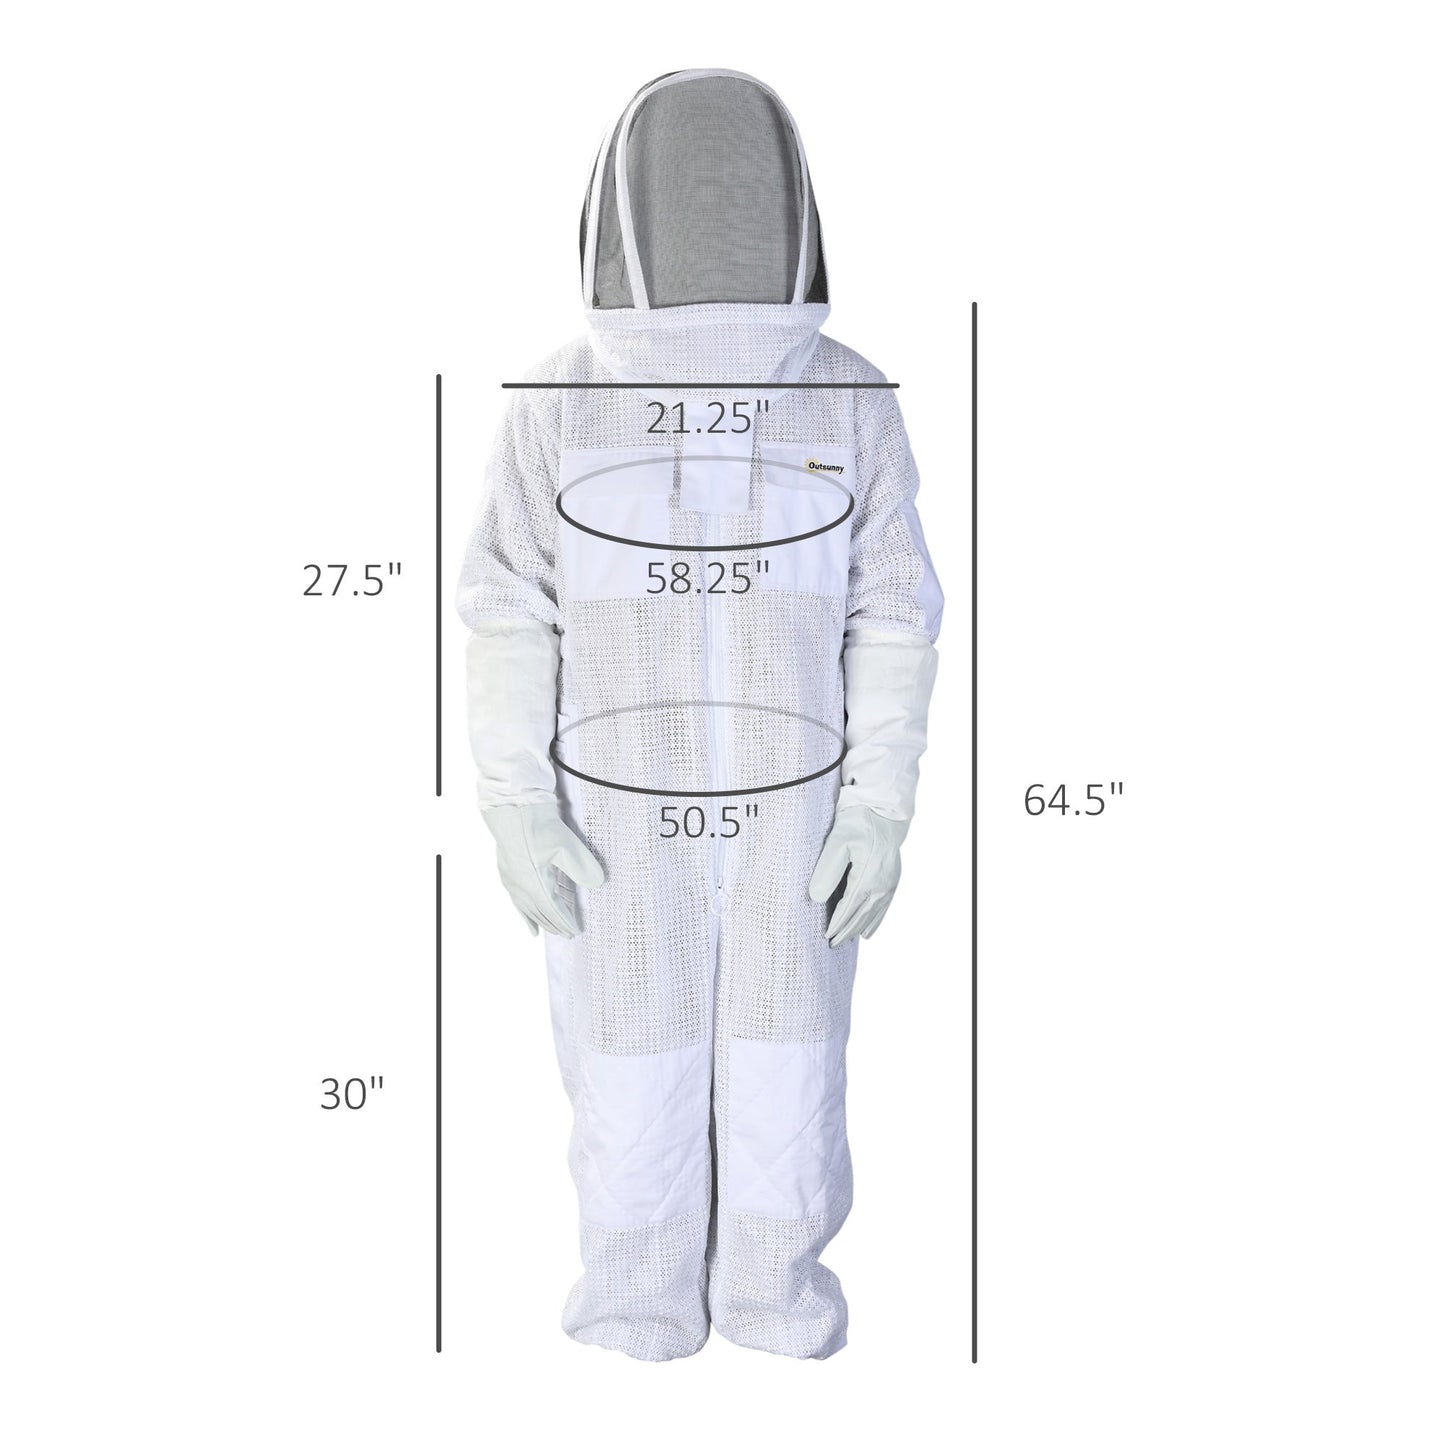 -Outsunny Beekeeping Suit Cotton Beekeeper Outfit Jacket with Gloves and Veil Hood for Men and Women, XXXL, Cream White - Outdoor Style Company